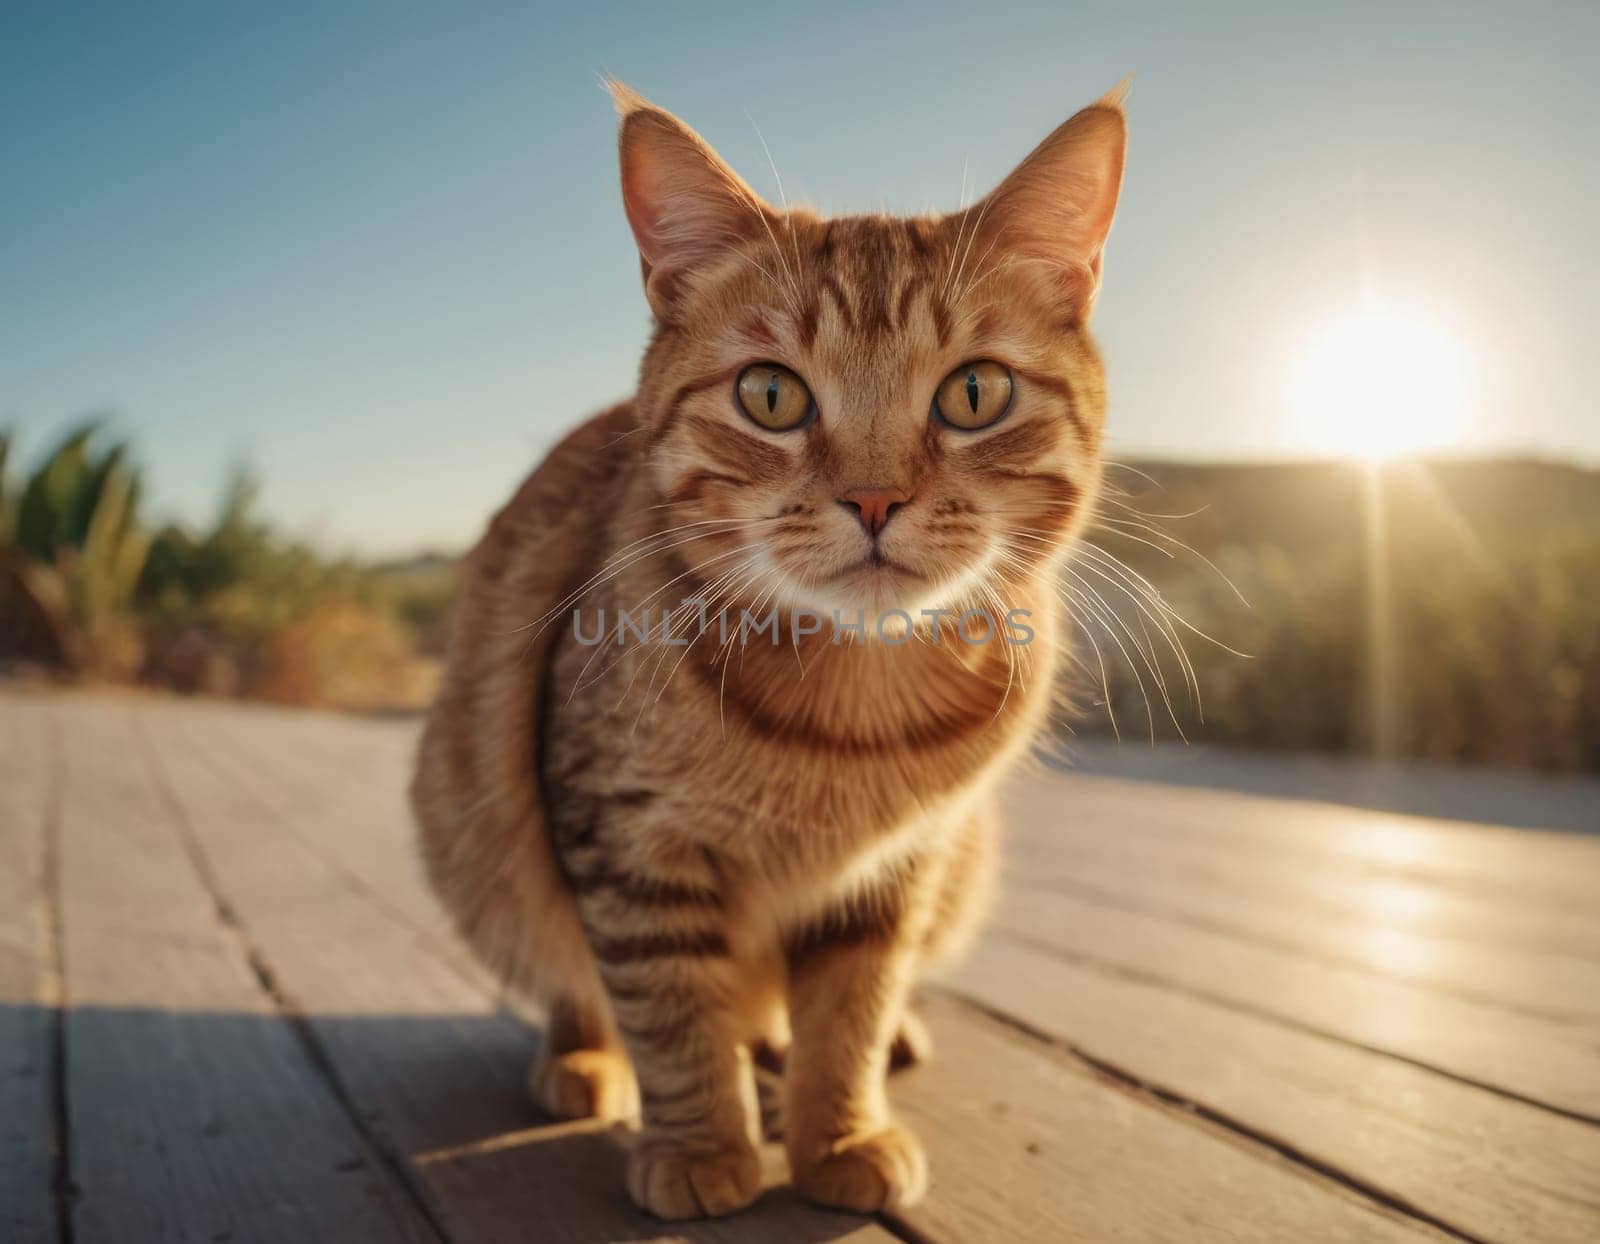 A ginger surprised cat with a collar stands on a wooden deck with the sun setting in the background